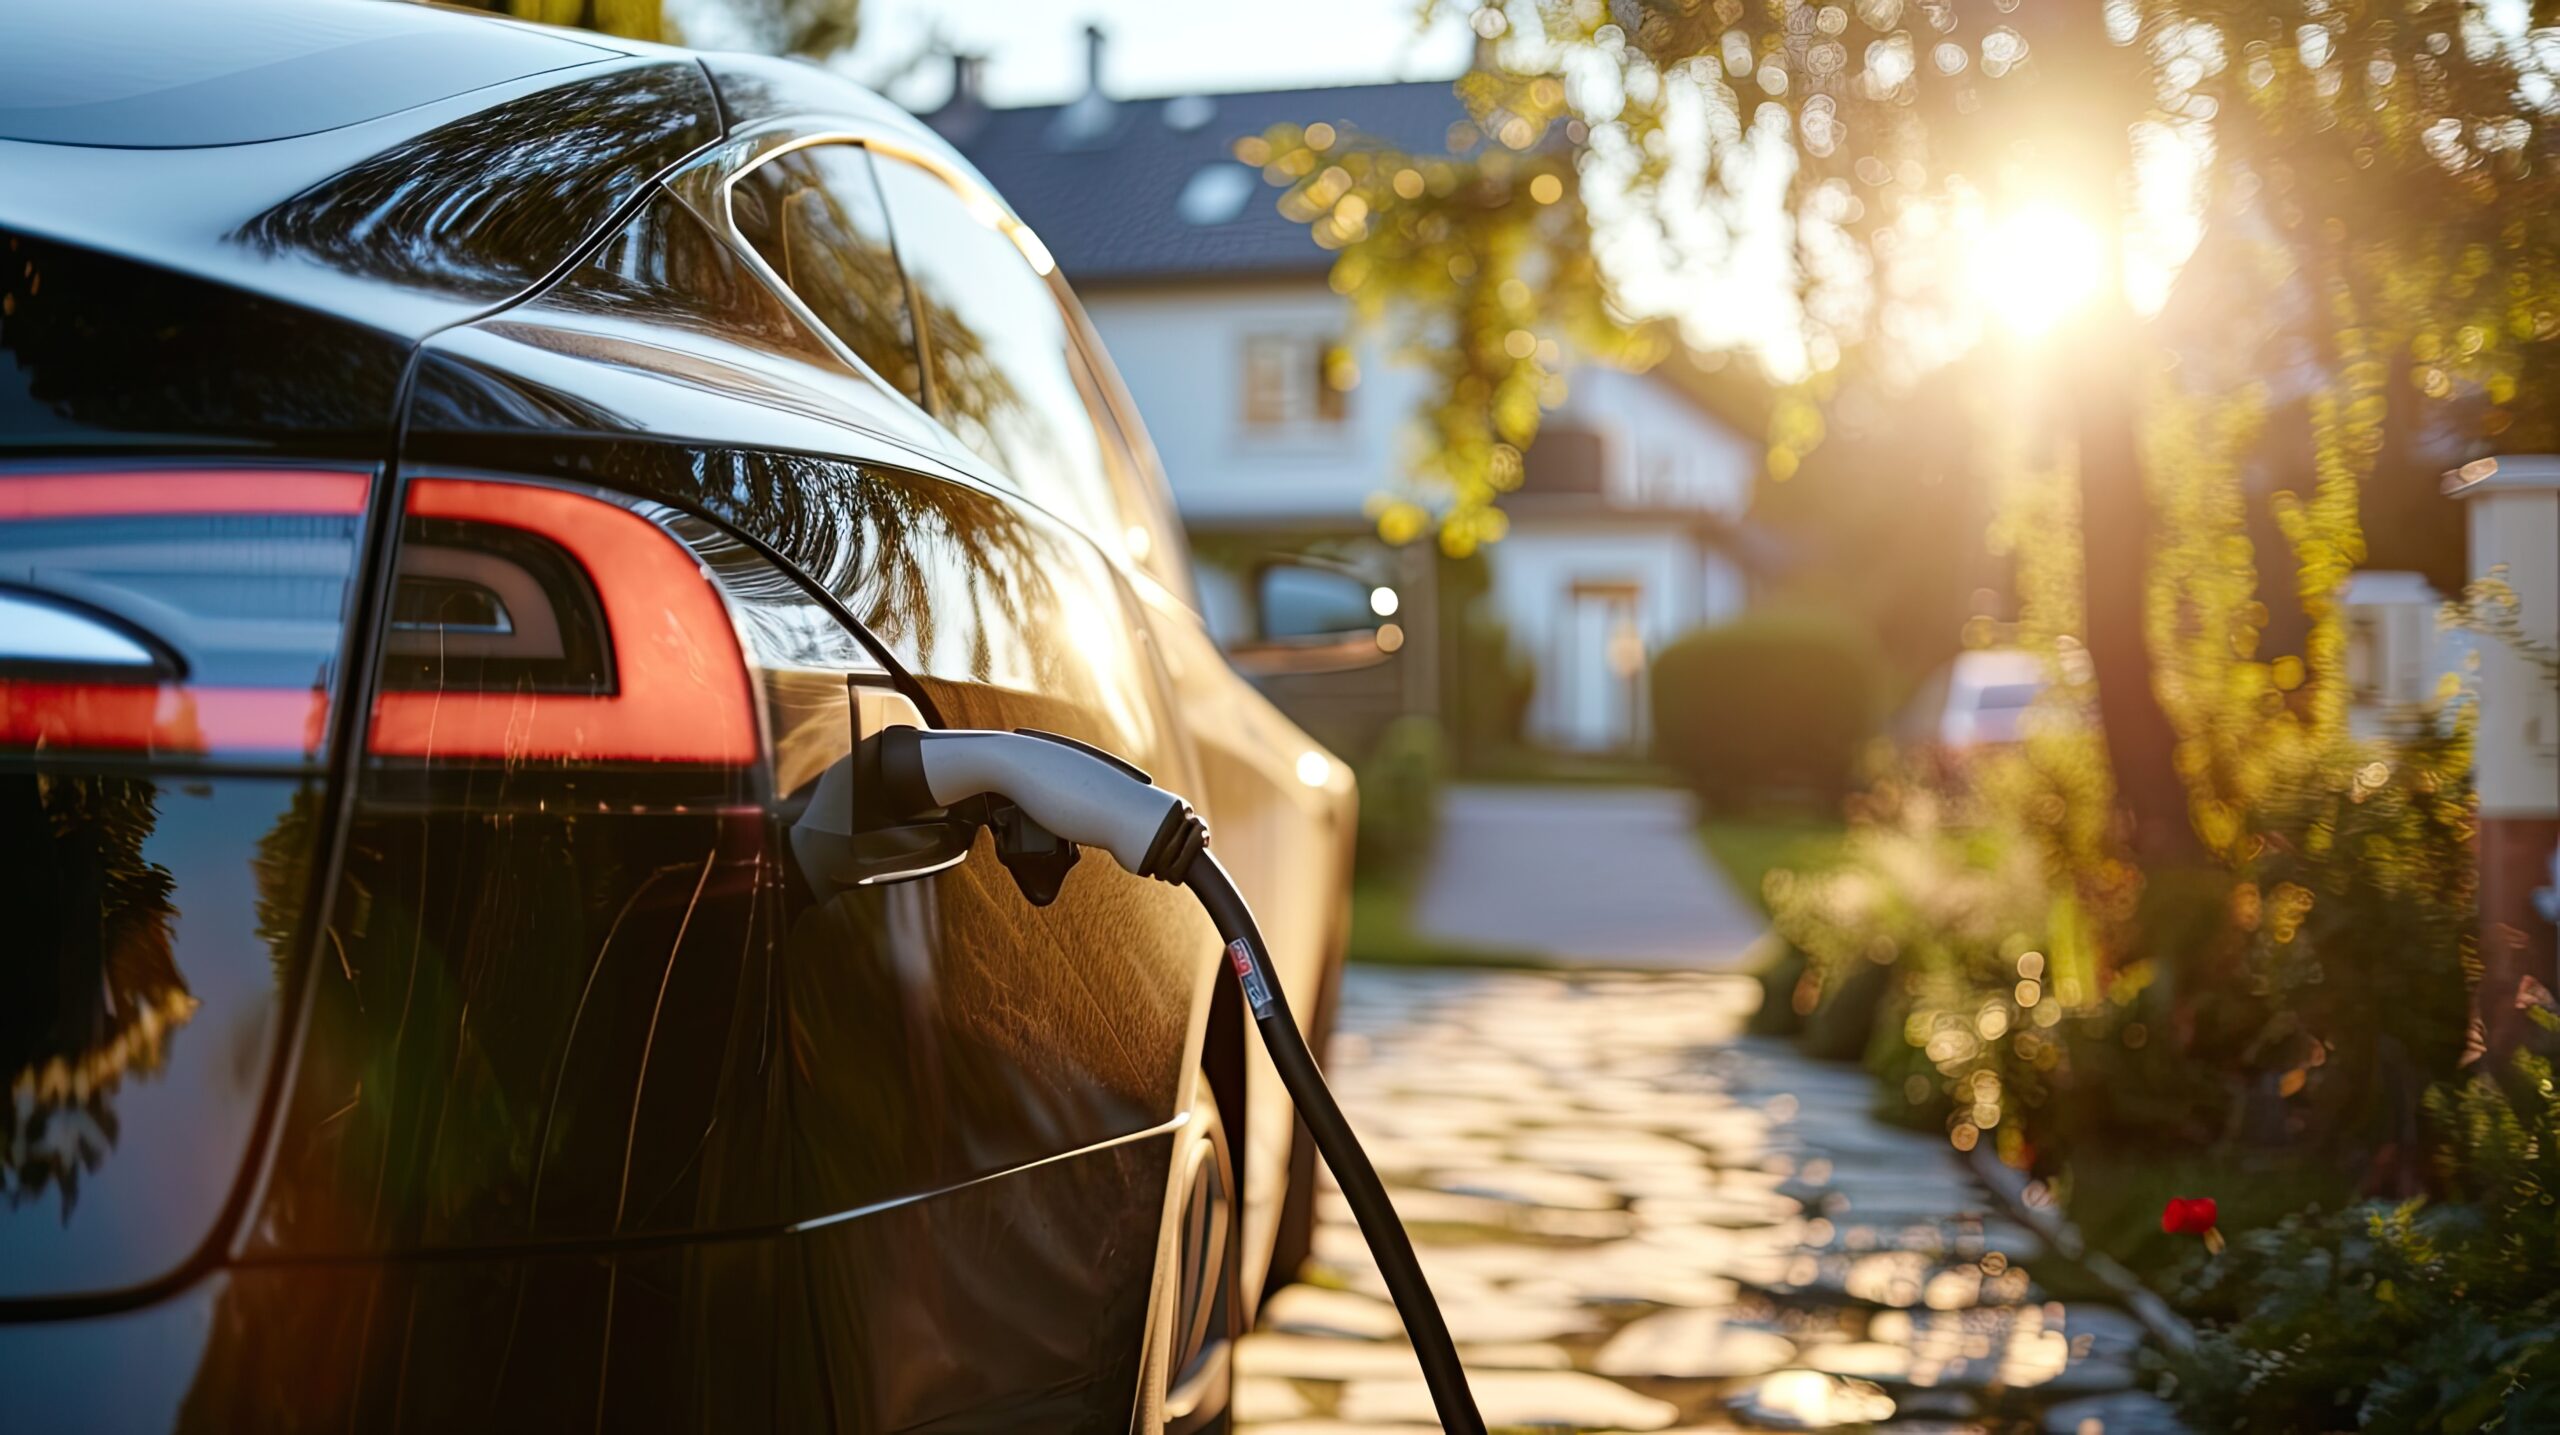 3 BIg ReasonsAmericans Haven't Rapidly Adopted EVs